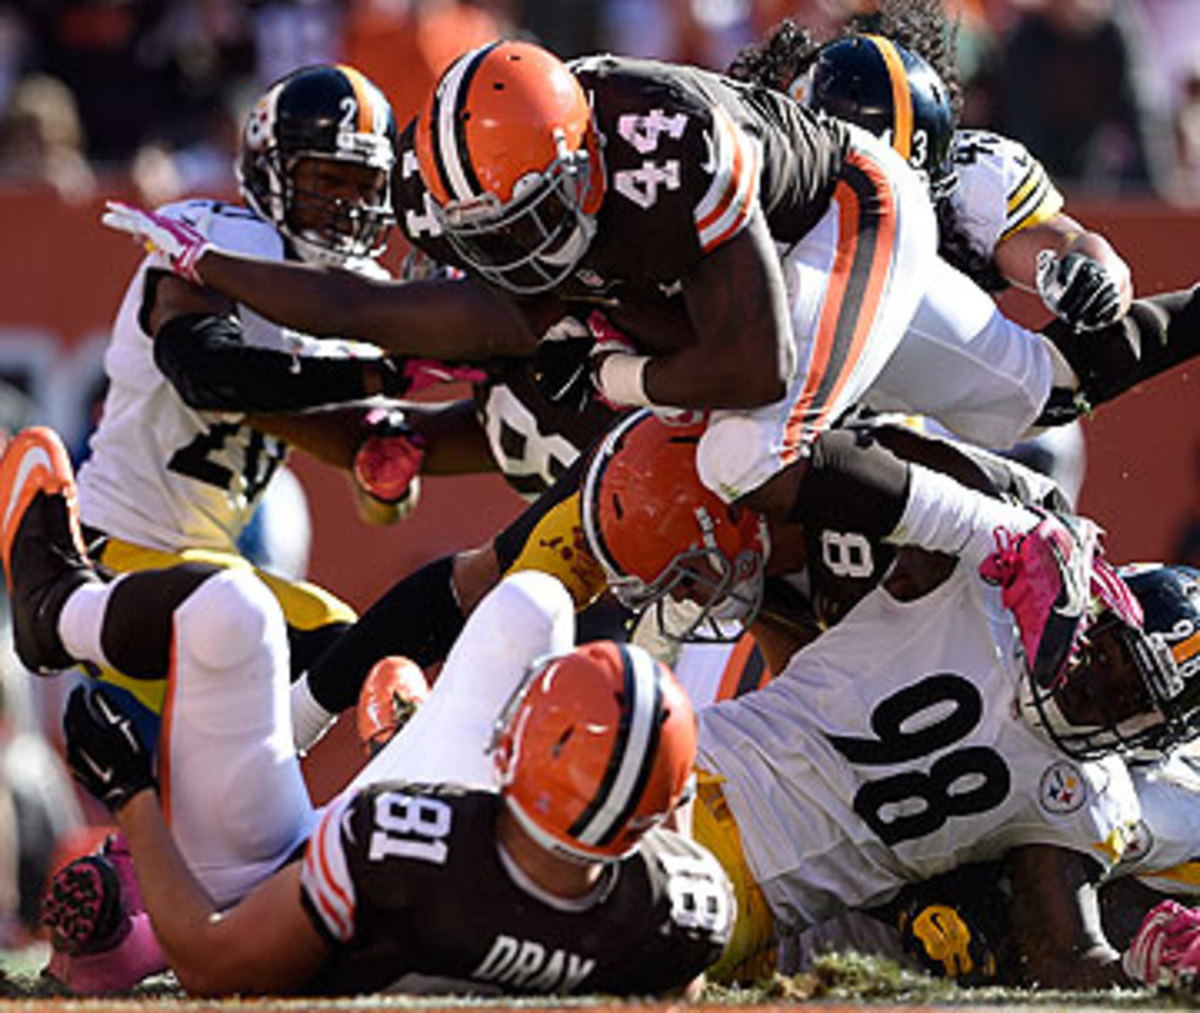 Ben Tate led a Browns' rushing attack that imposed its will on the Steelers defense. (Jason Miller/Getty Images)